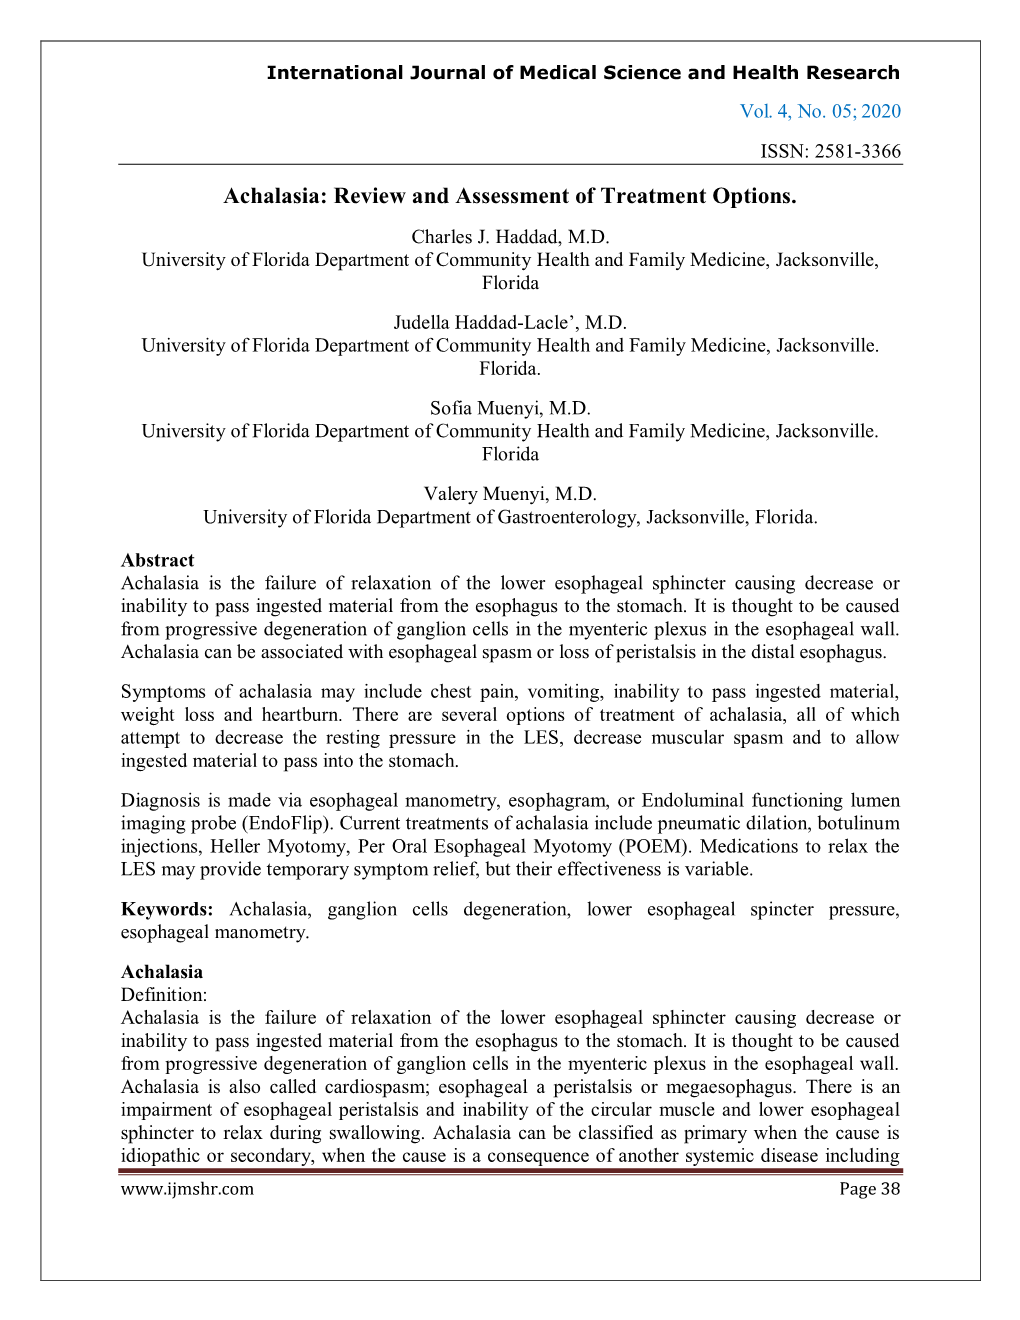 Achalasia: Review and Assessment of Treatment Options